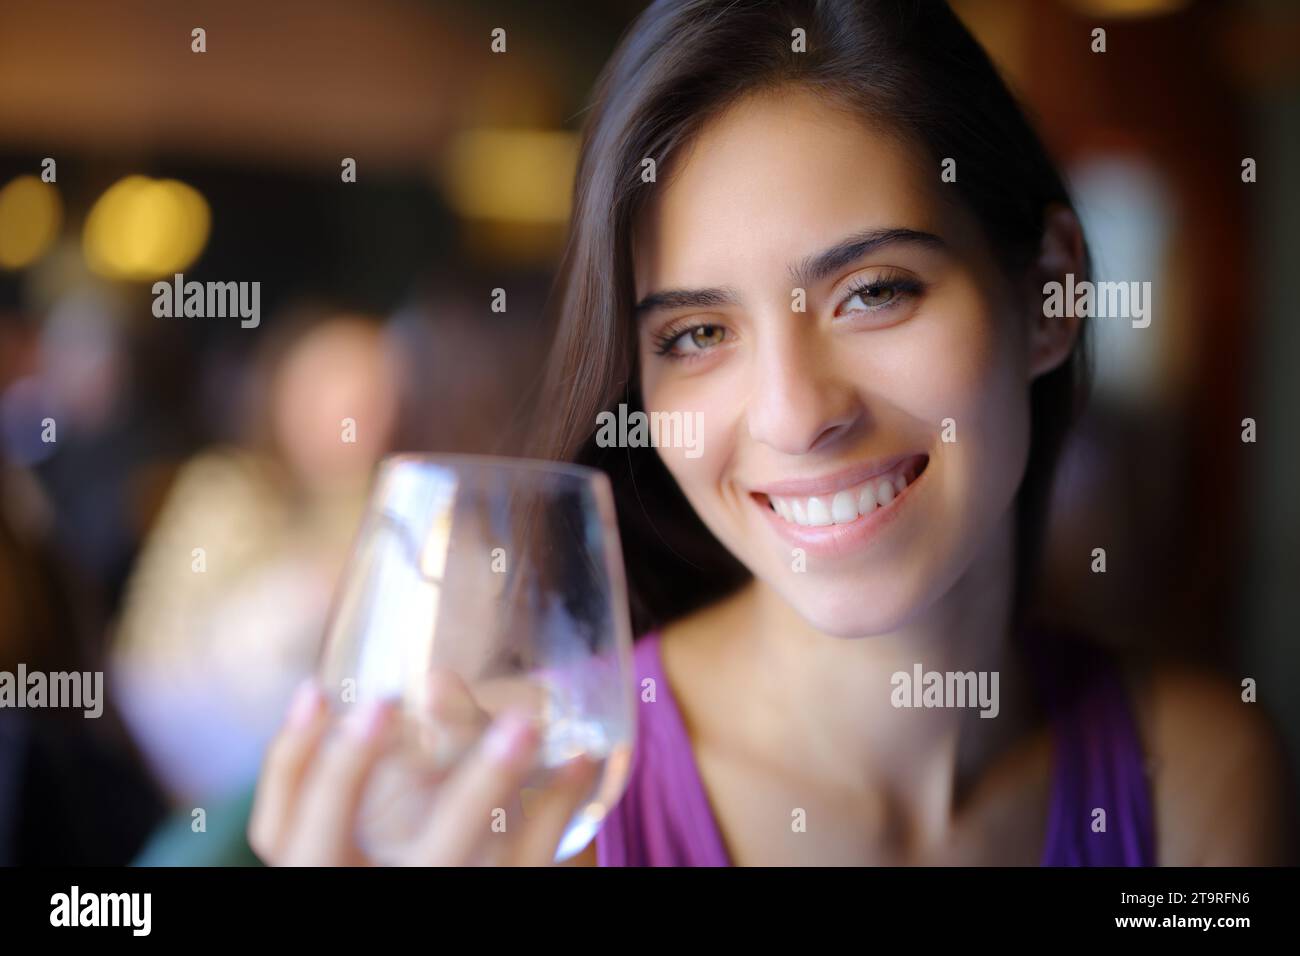 Happy restaurant customer holding water glass looking at camera Stock Photo